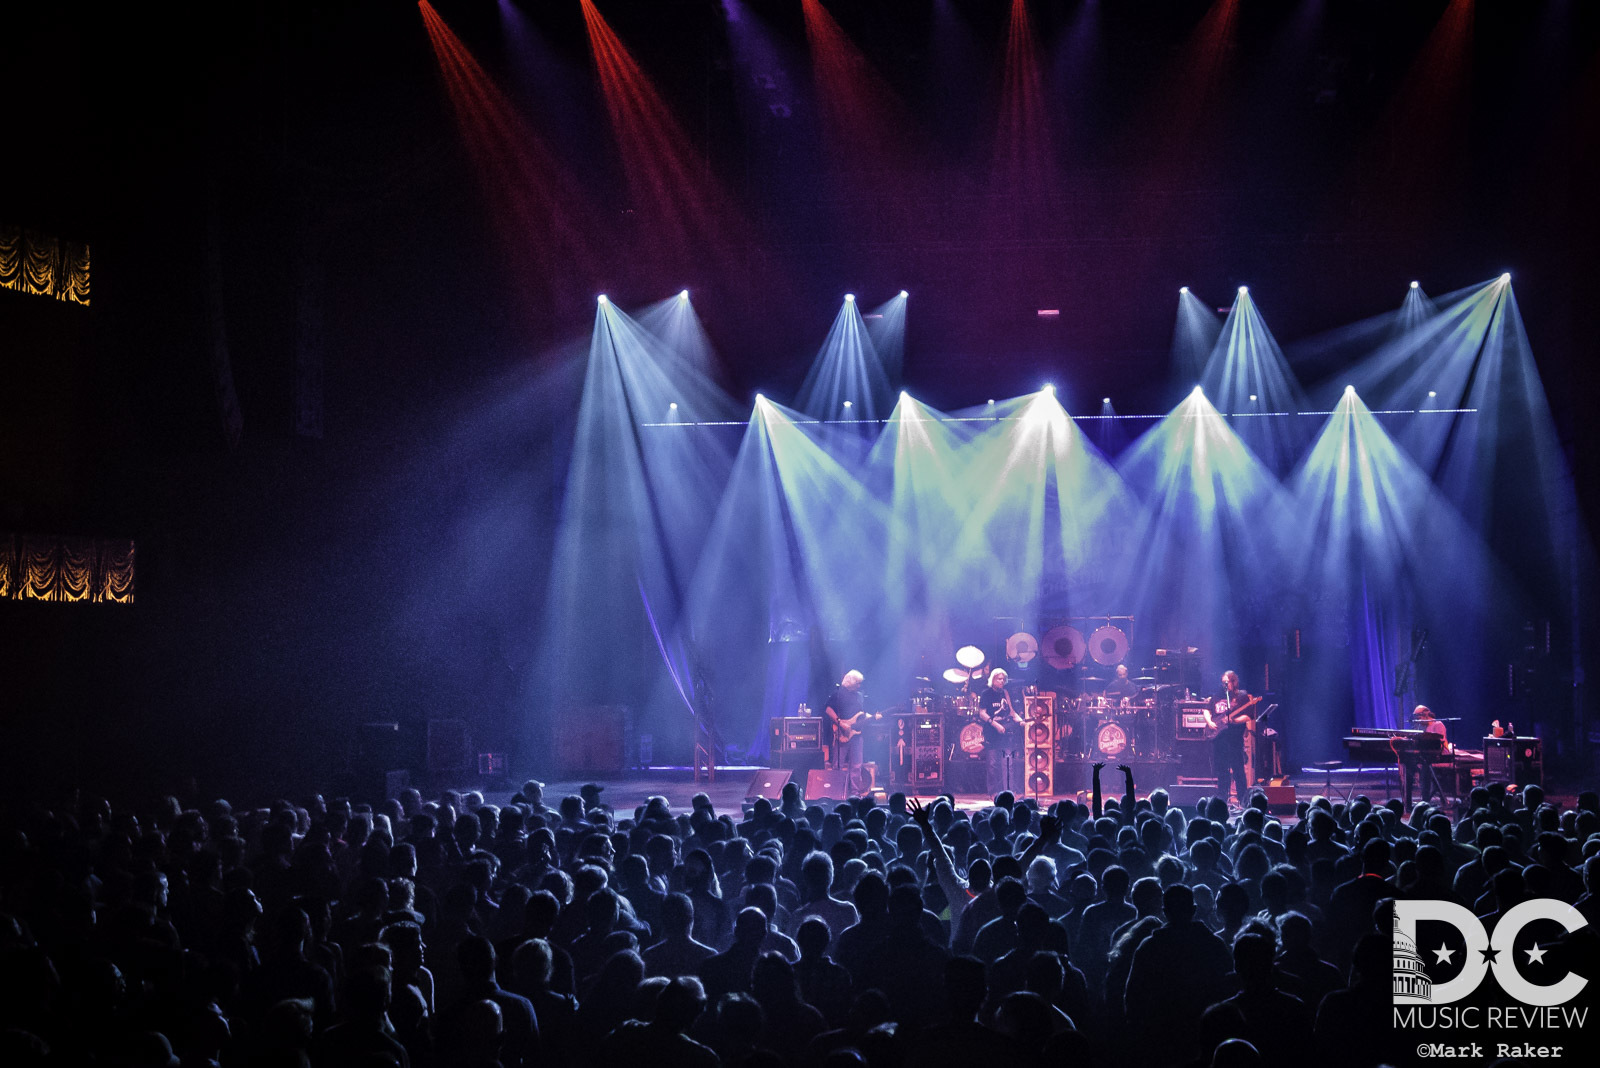 Dark Star Orchestra performing at The Anthem, Washington, D.C. COURTESY THE ARTISTS